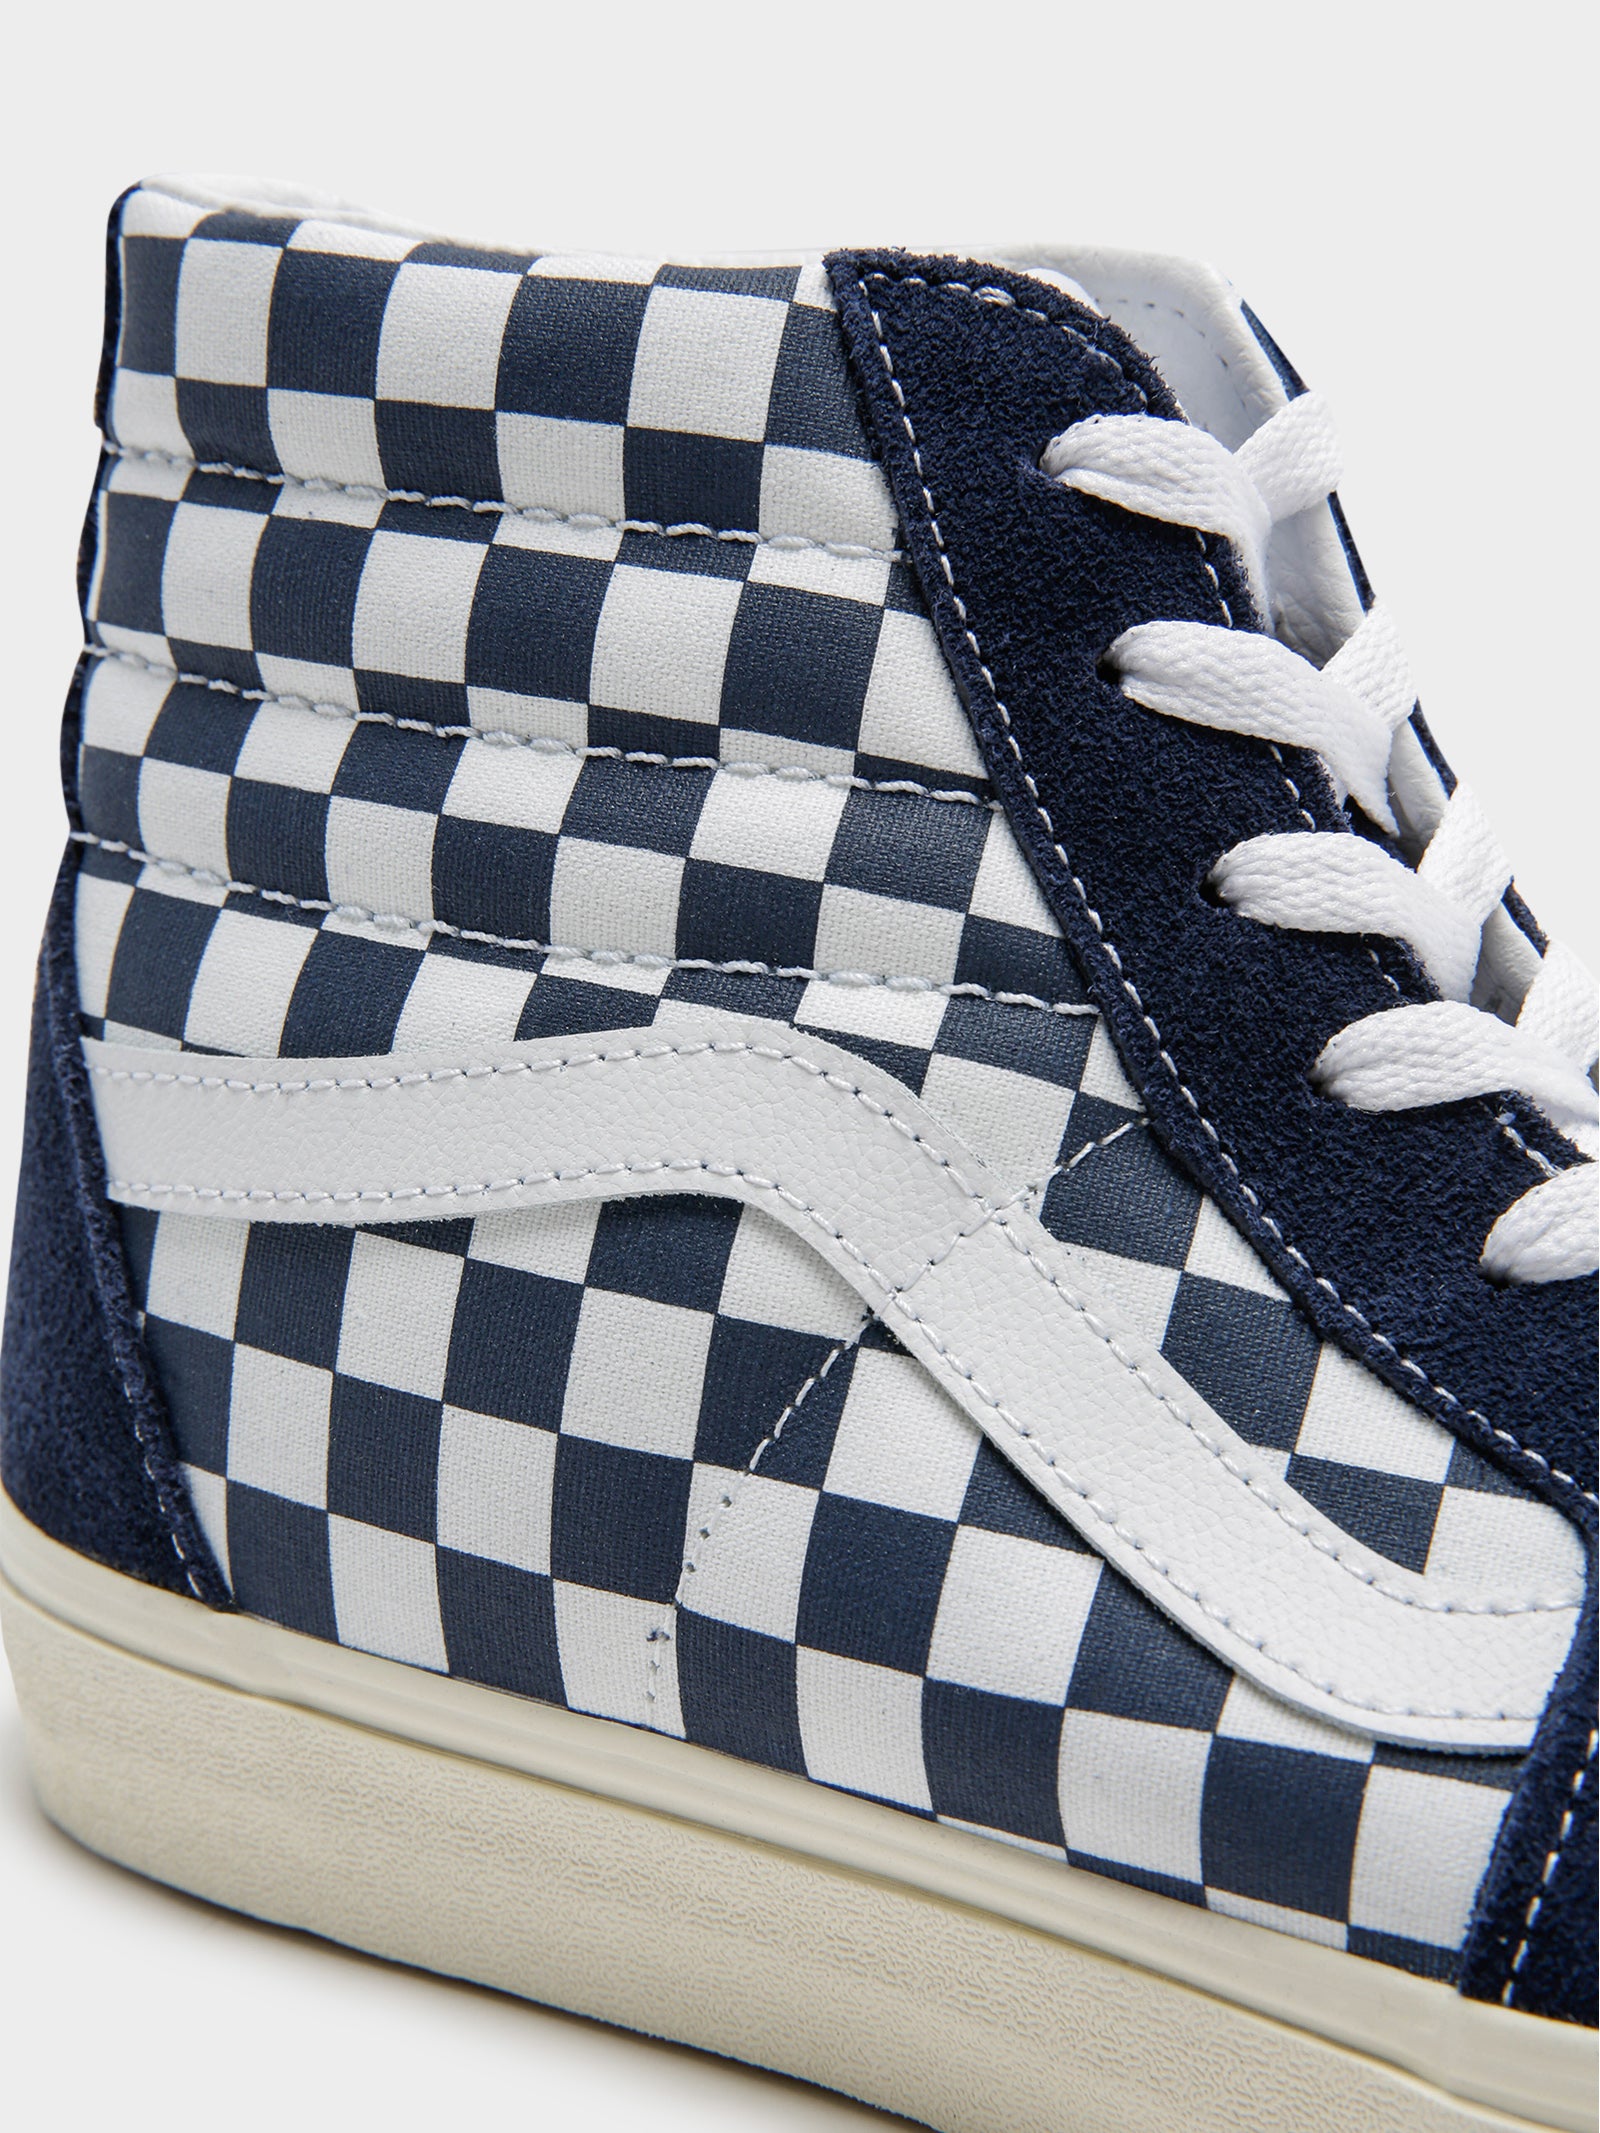 Unisex Sk8 High Top Sneakers in Checkerboard Dress Blues & White